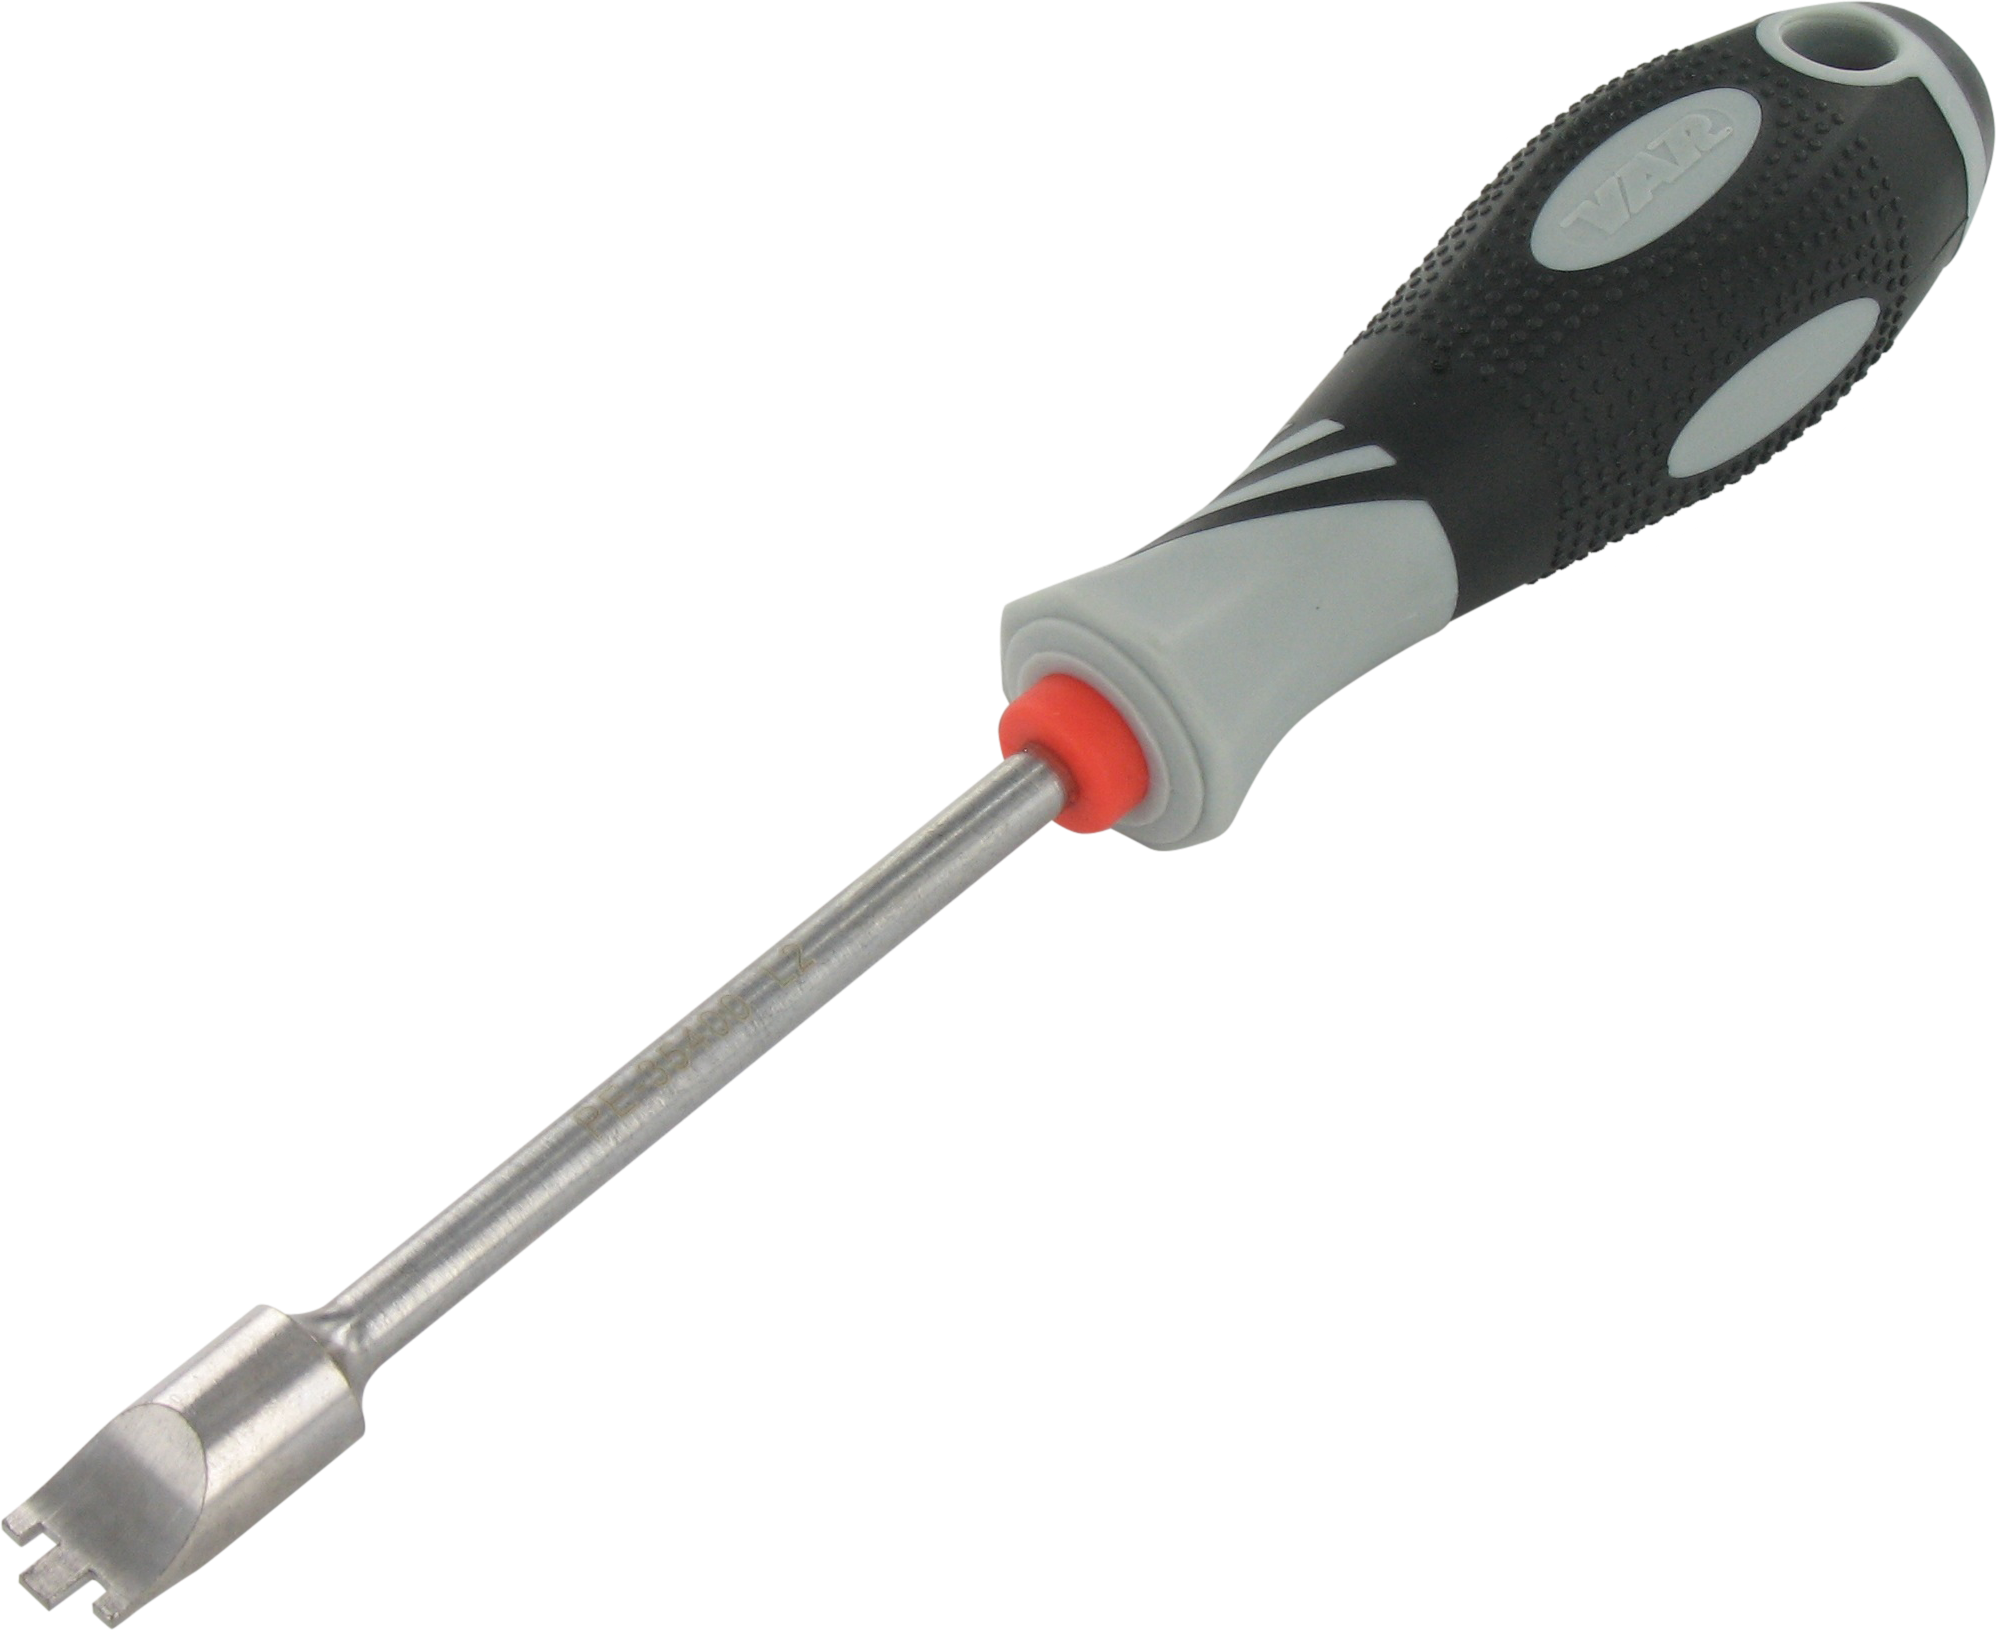 Png images free download. Screwdriver clipart hand tool